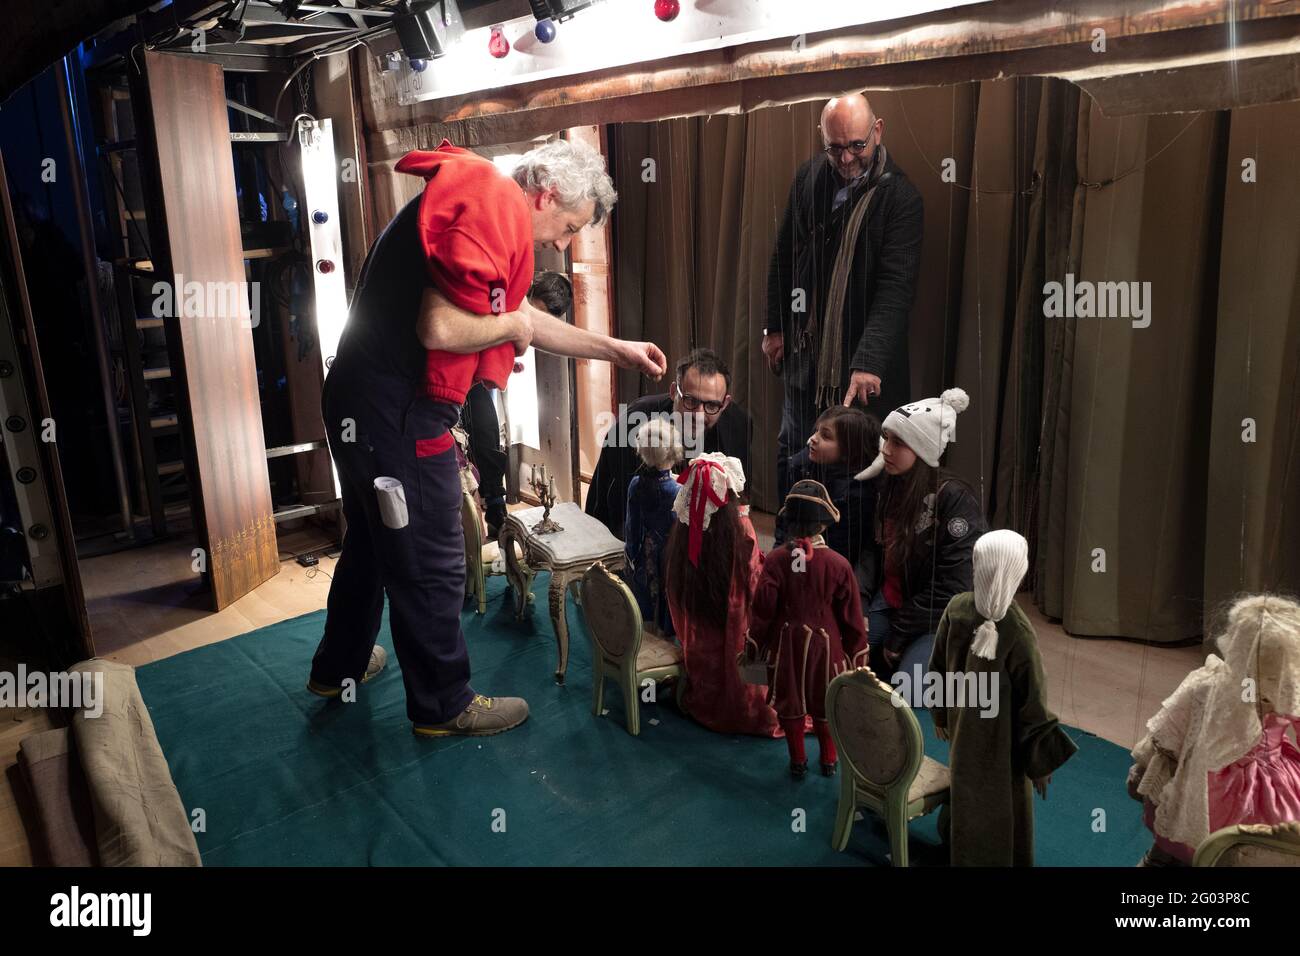 Kids visiting the Marionette Colla backstage, at the milanese Girolamo theater founded in 1868, in Milan. Stock Photo